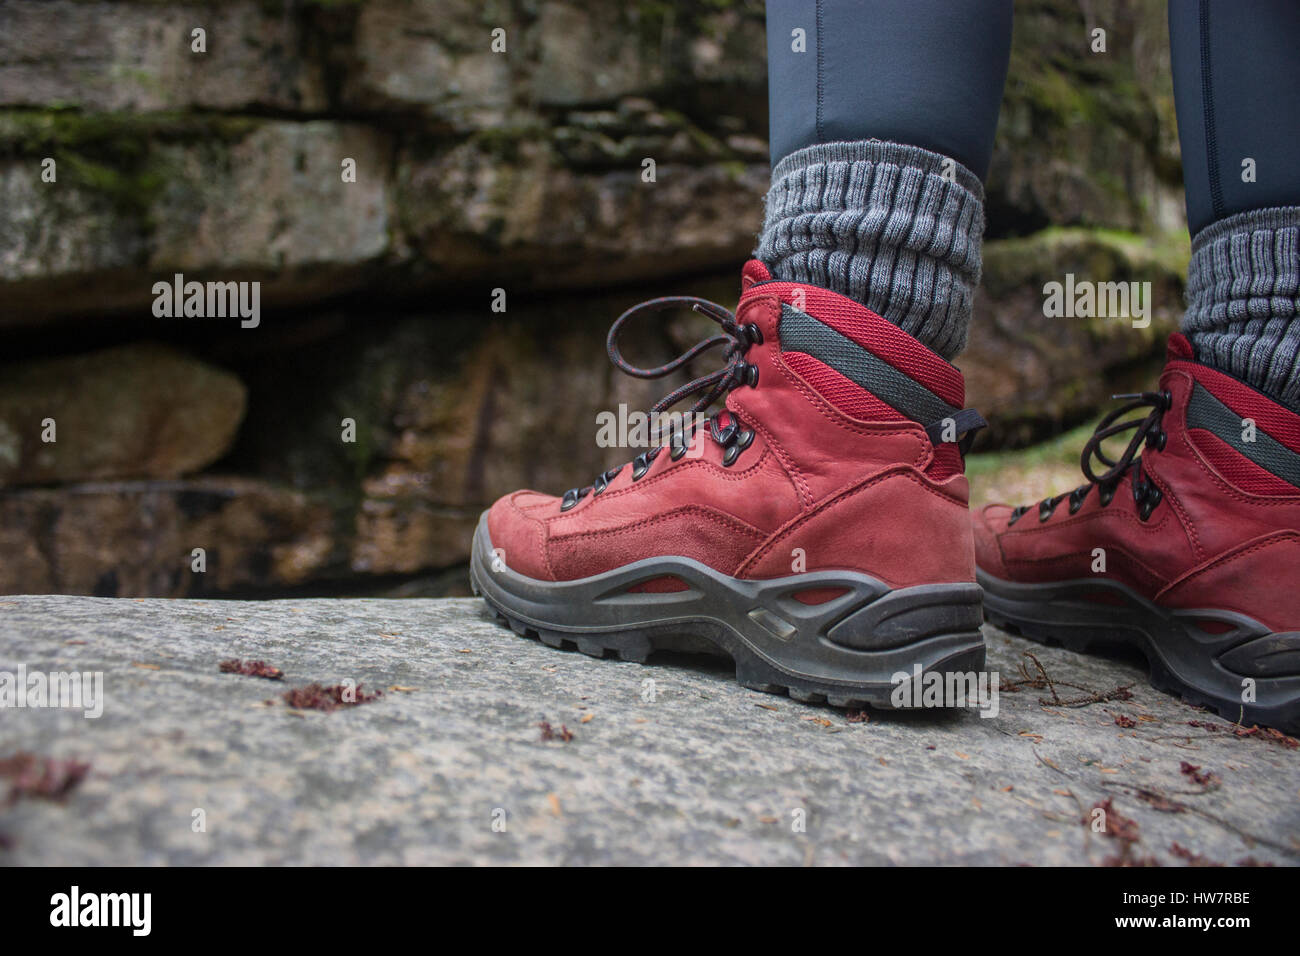 red walking boots